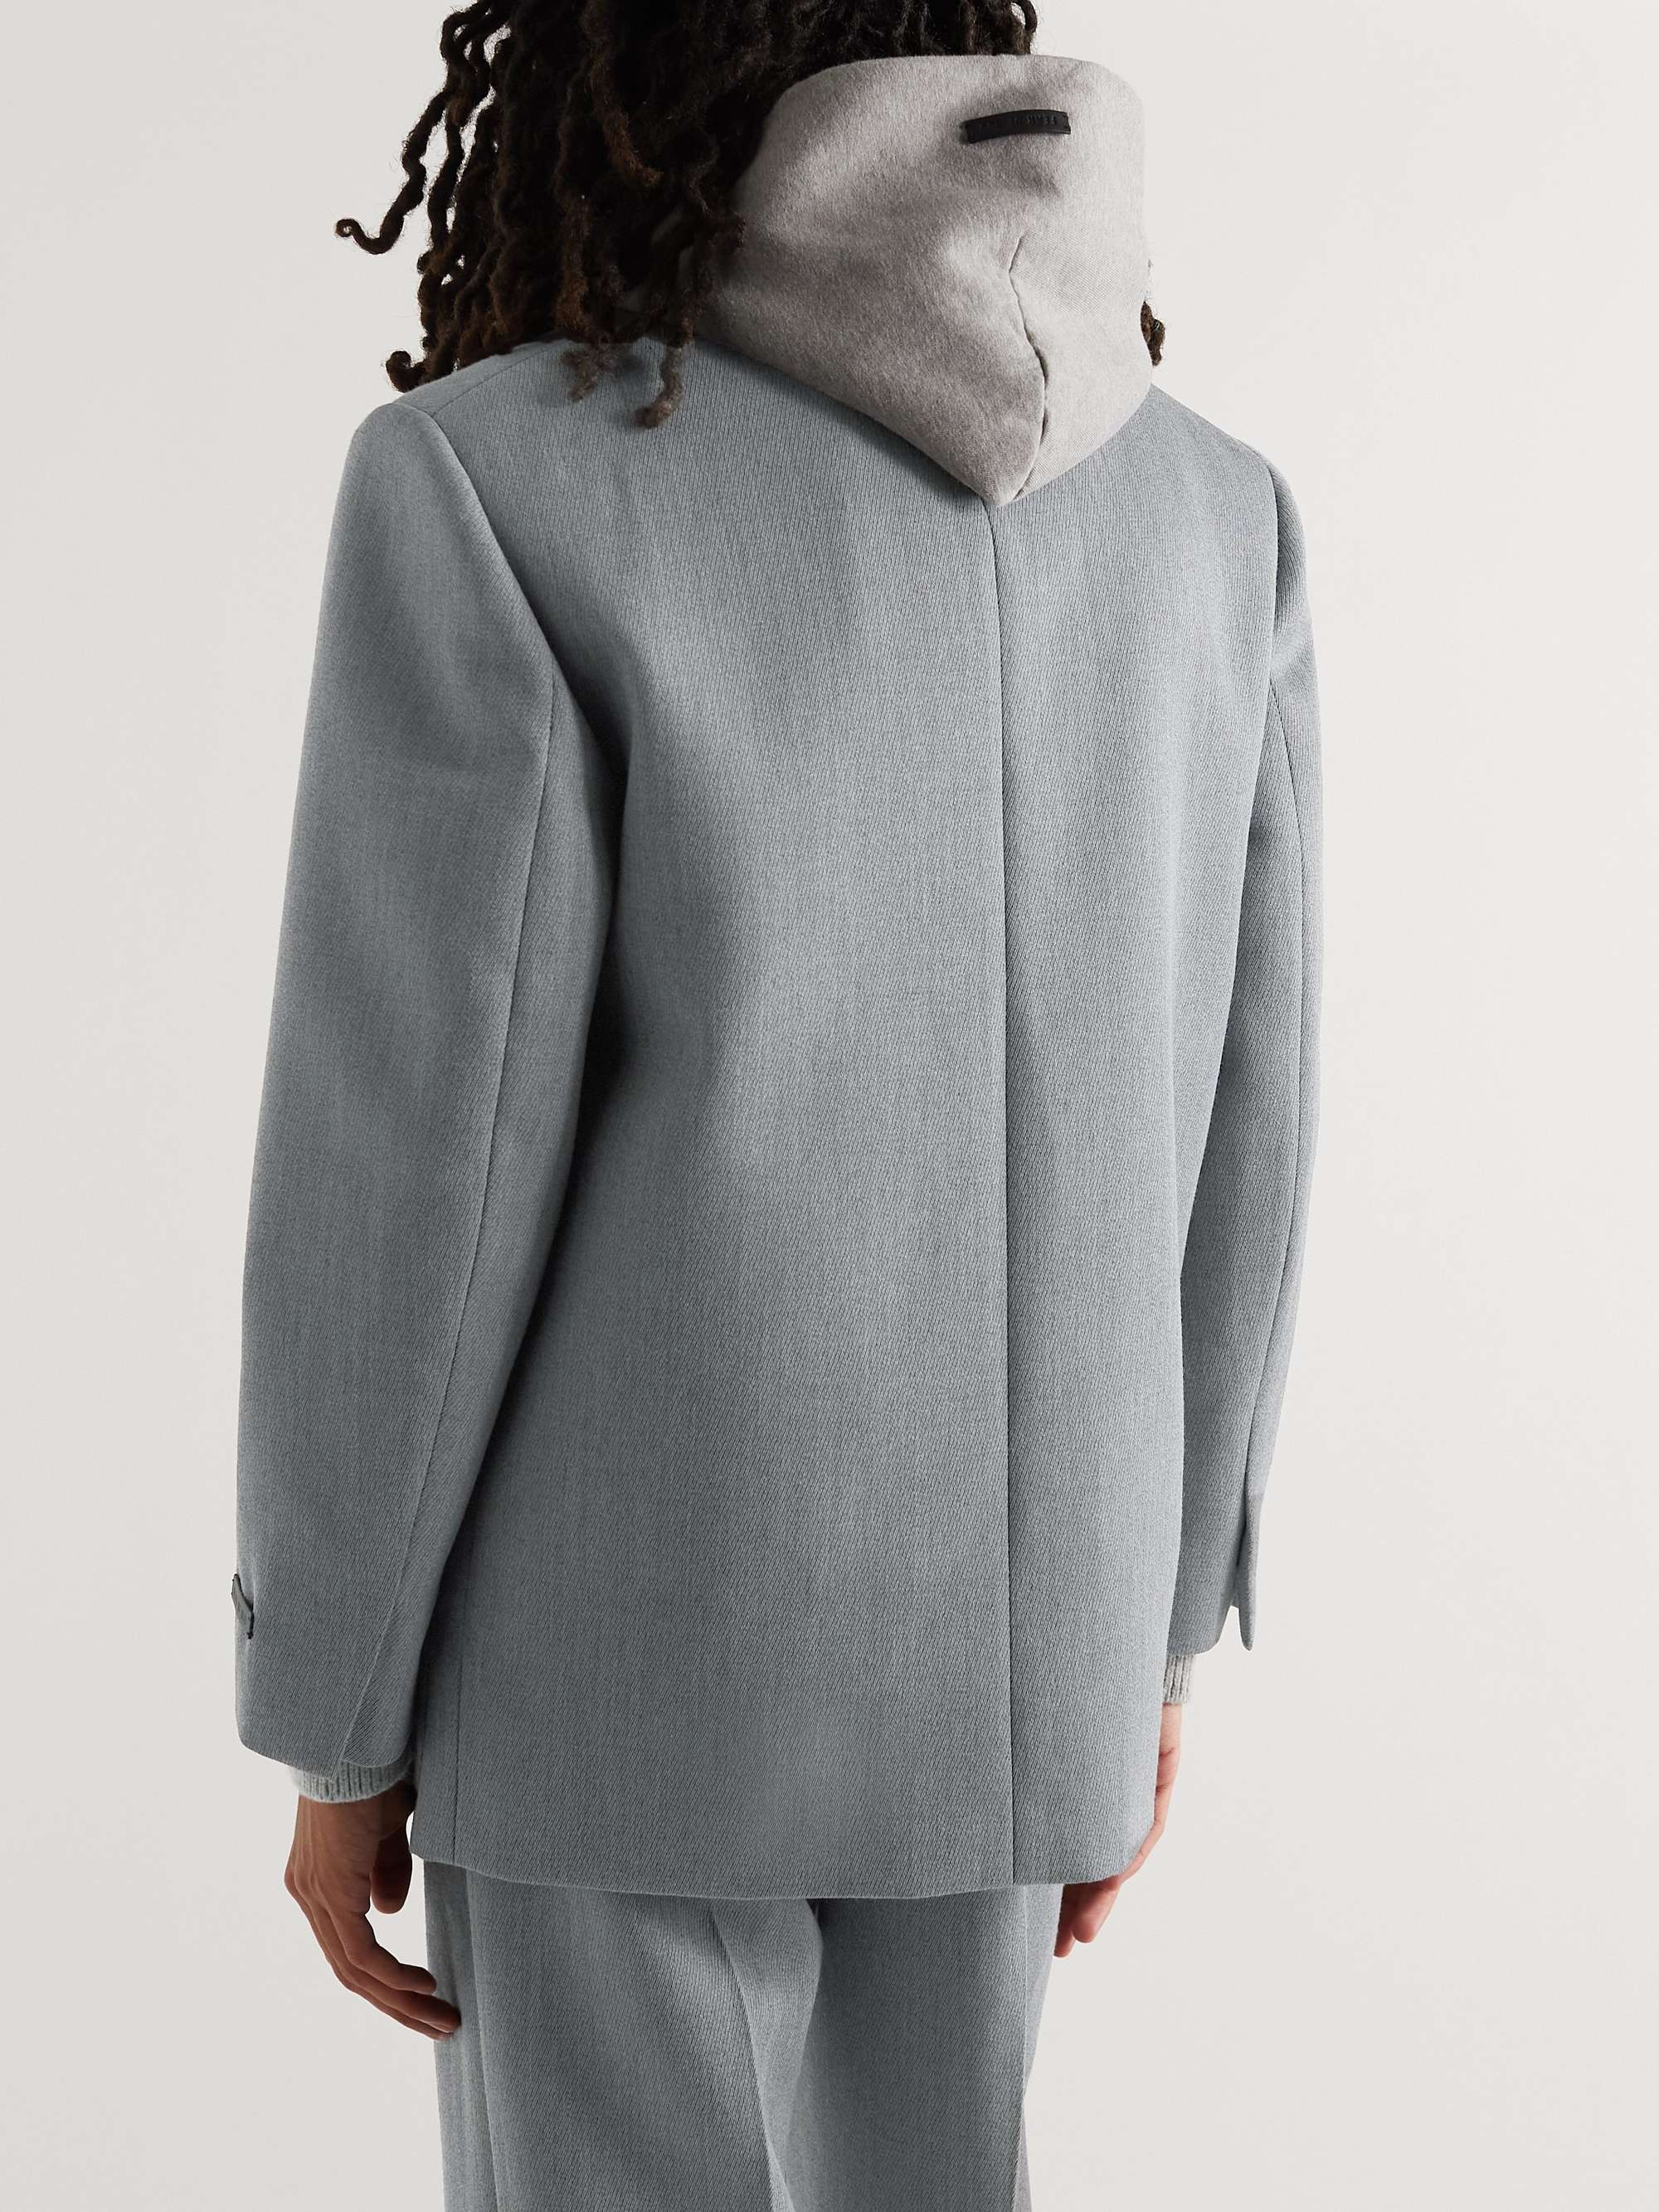 FEAR OF GOD Double-Breasted Wool Suit Jacket